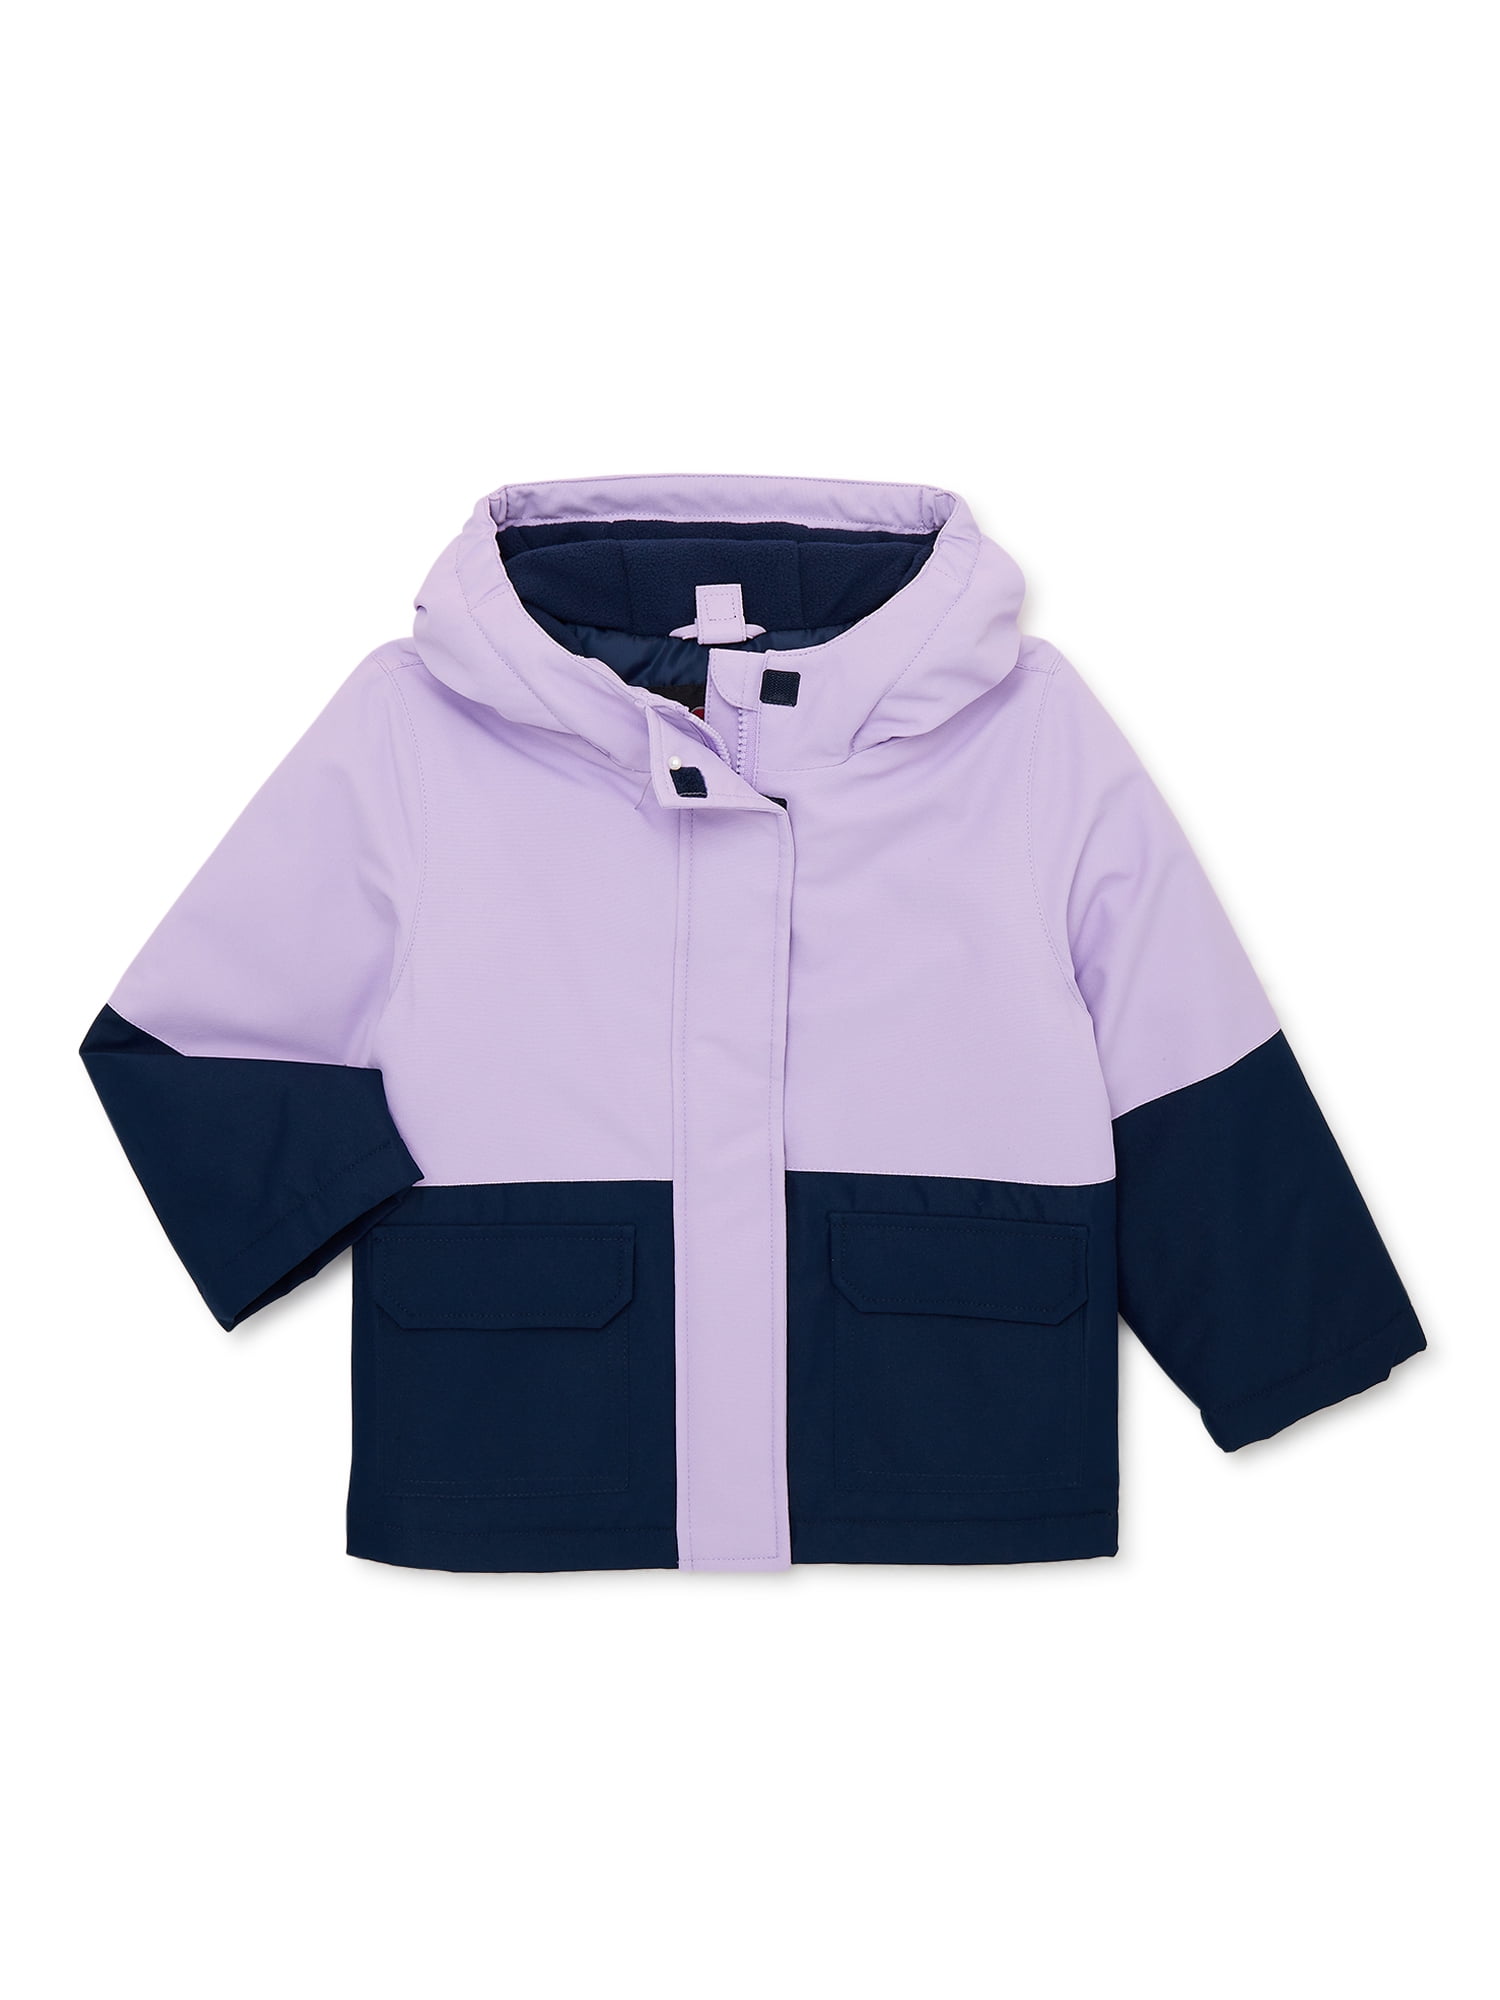 Swiss Tech Toddler Girl Heavyweight Systems Jacket, 4-in-1, Sizes 2T-5T